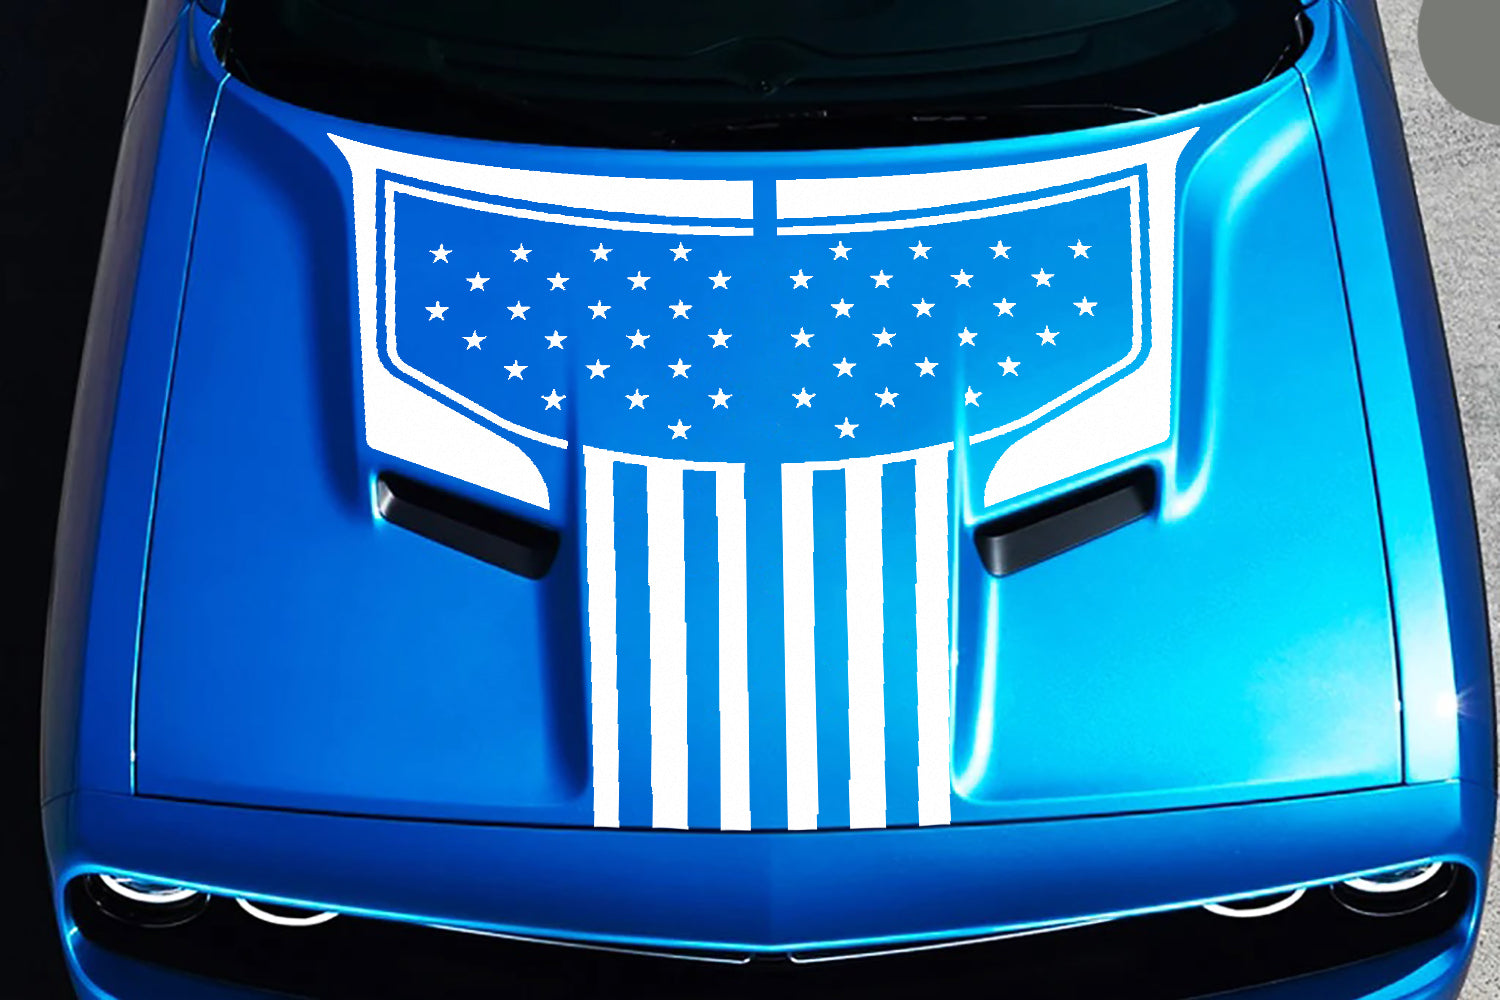 Patriot American flag hood decals for dodge challenger 2015 to 2023 models white